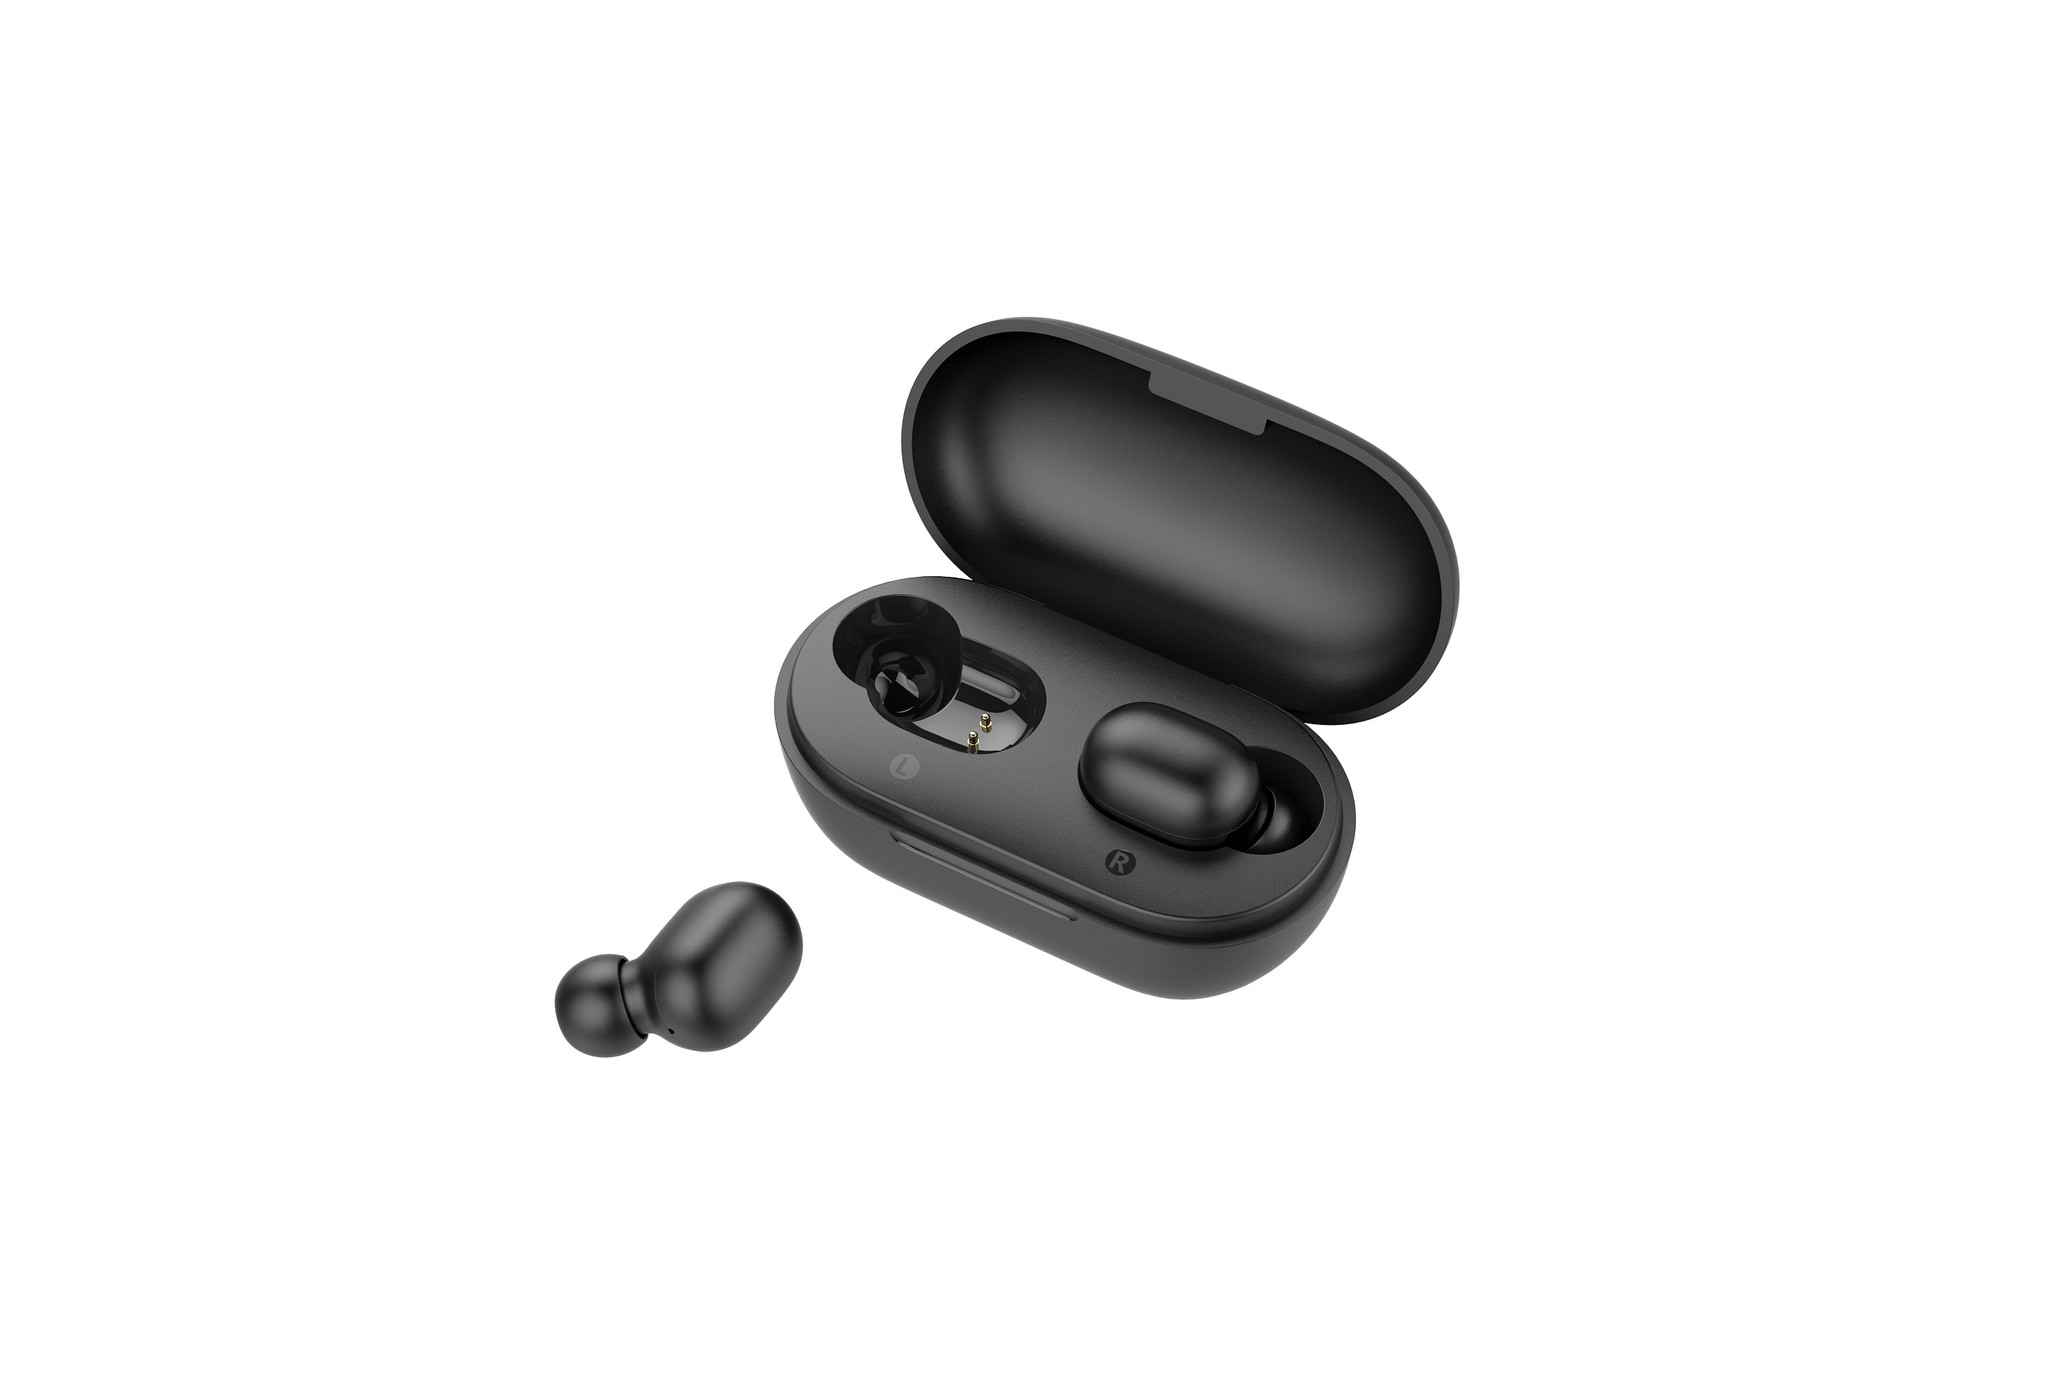 Auriculares inalambricos Haylou GT1 Pro Black Bluetooth By Xiaomi